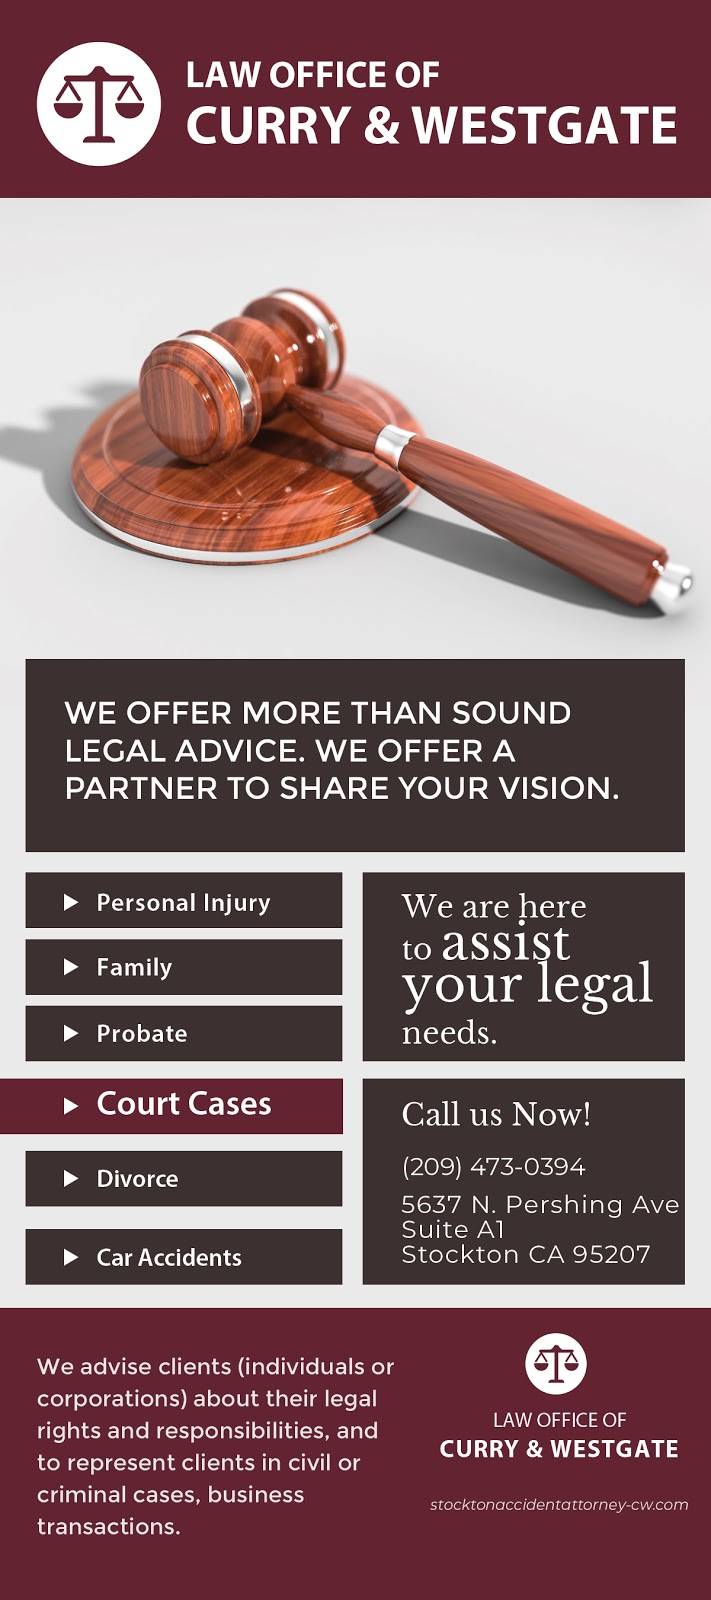 Law Office of Curry & Westgate | 5637 N Pershing Ave suit a-1, Stockton, CA 95207, USA | Phone: (209) 473-0394